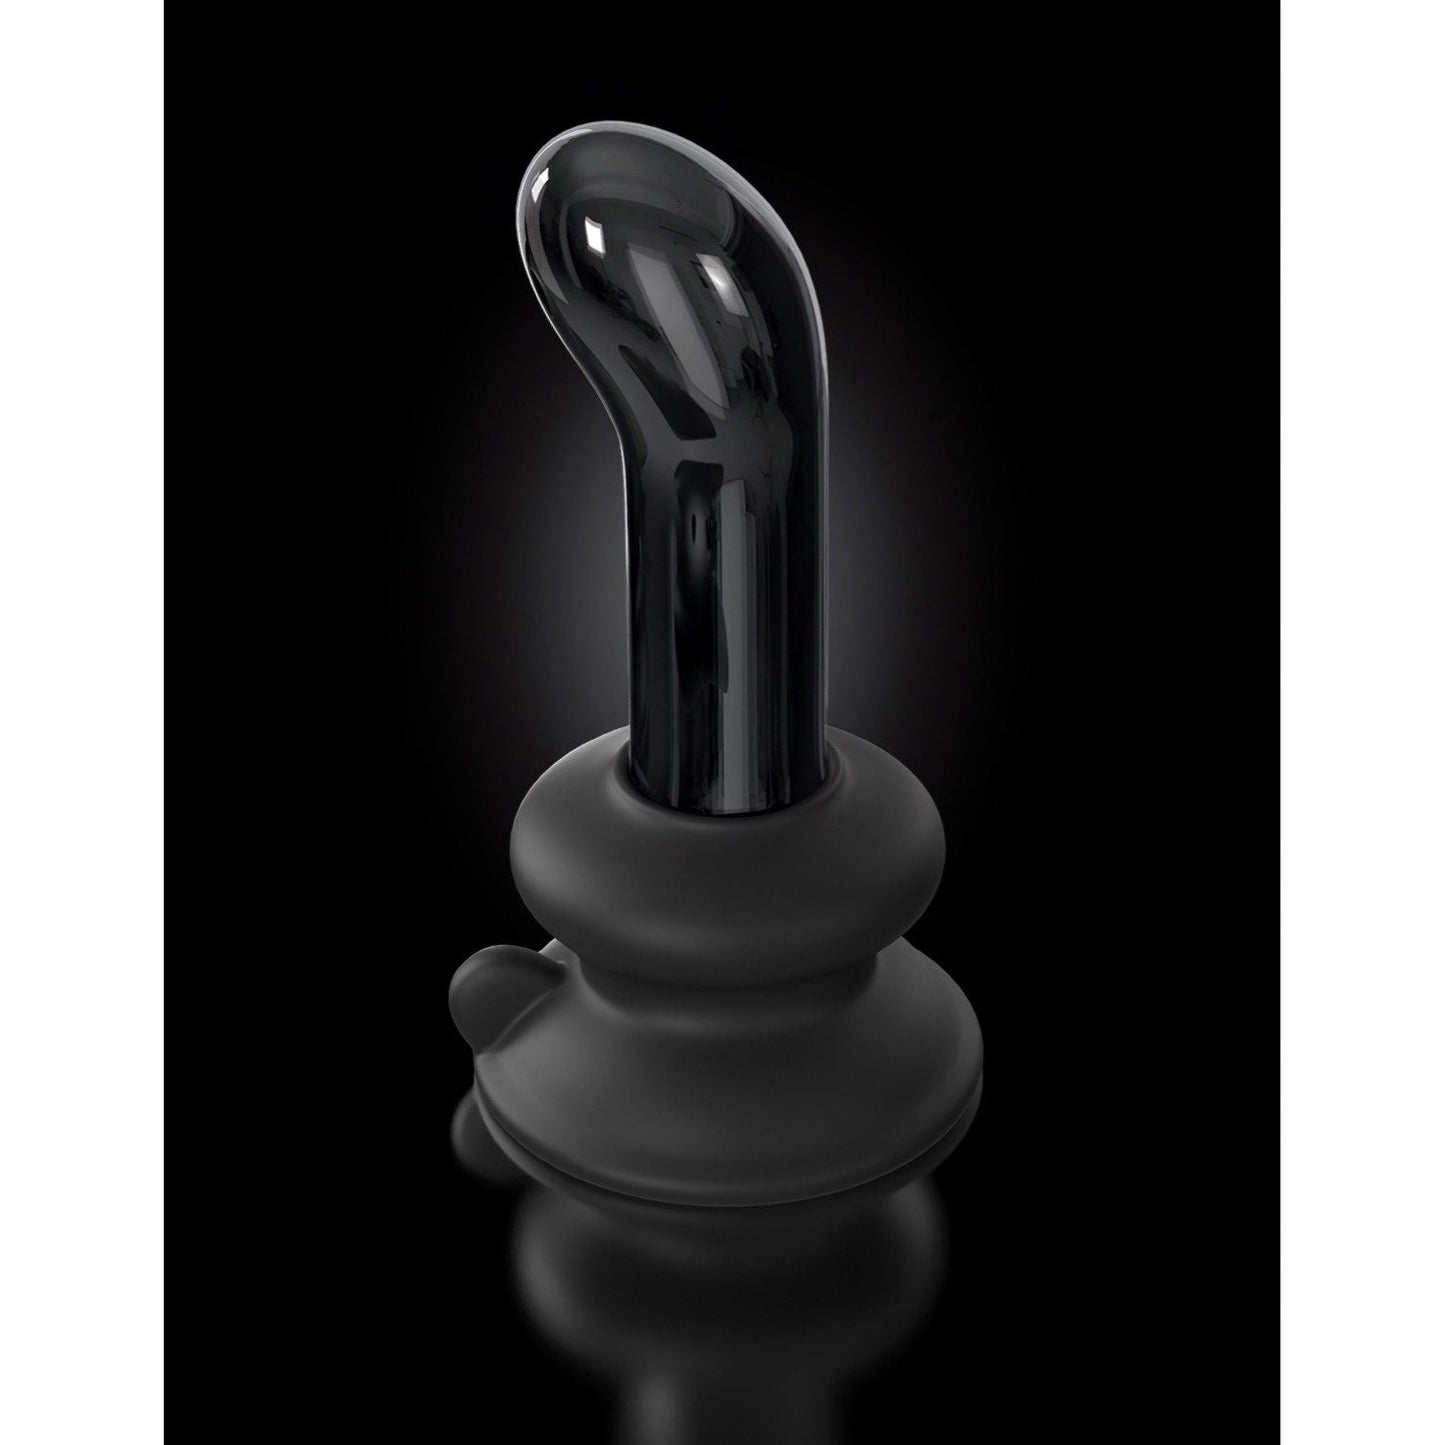 No. 84 - Black Glass USB Rechargeable Vibrating Butt Plug with Remote